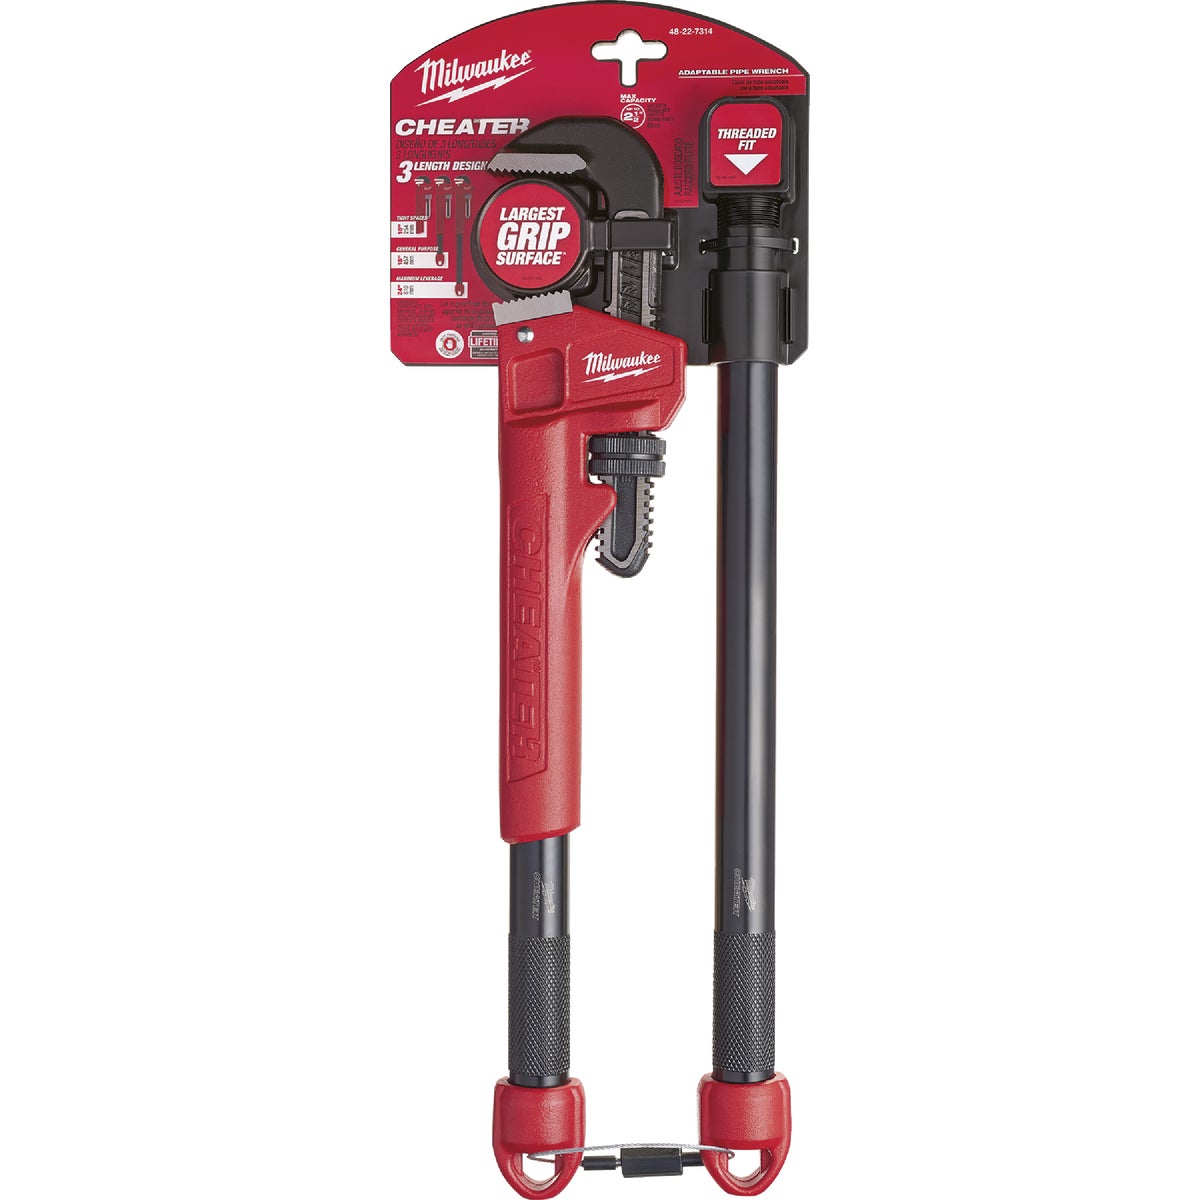 Item 303578, The Cheater Adaptable Pipe Wrench features a 3 length design which delivers